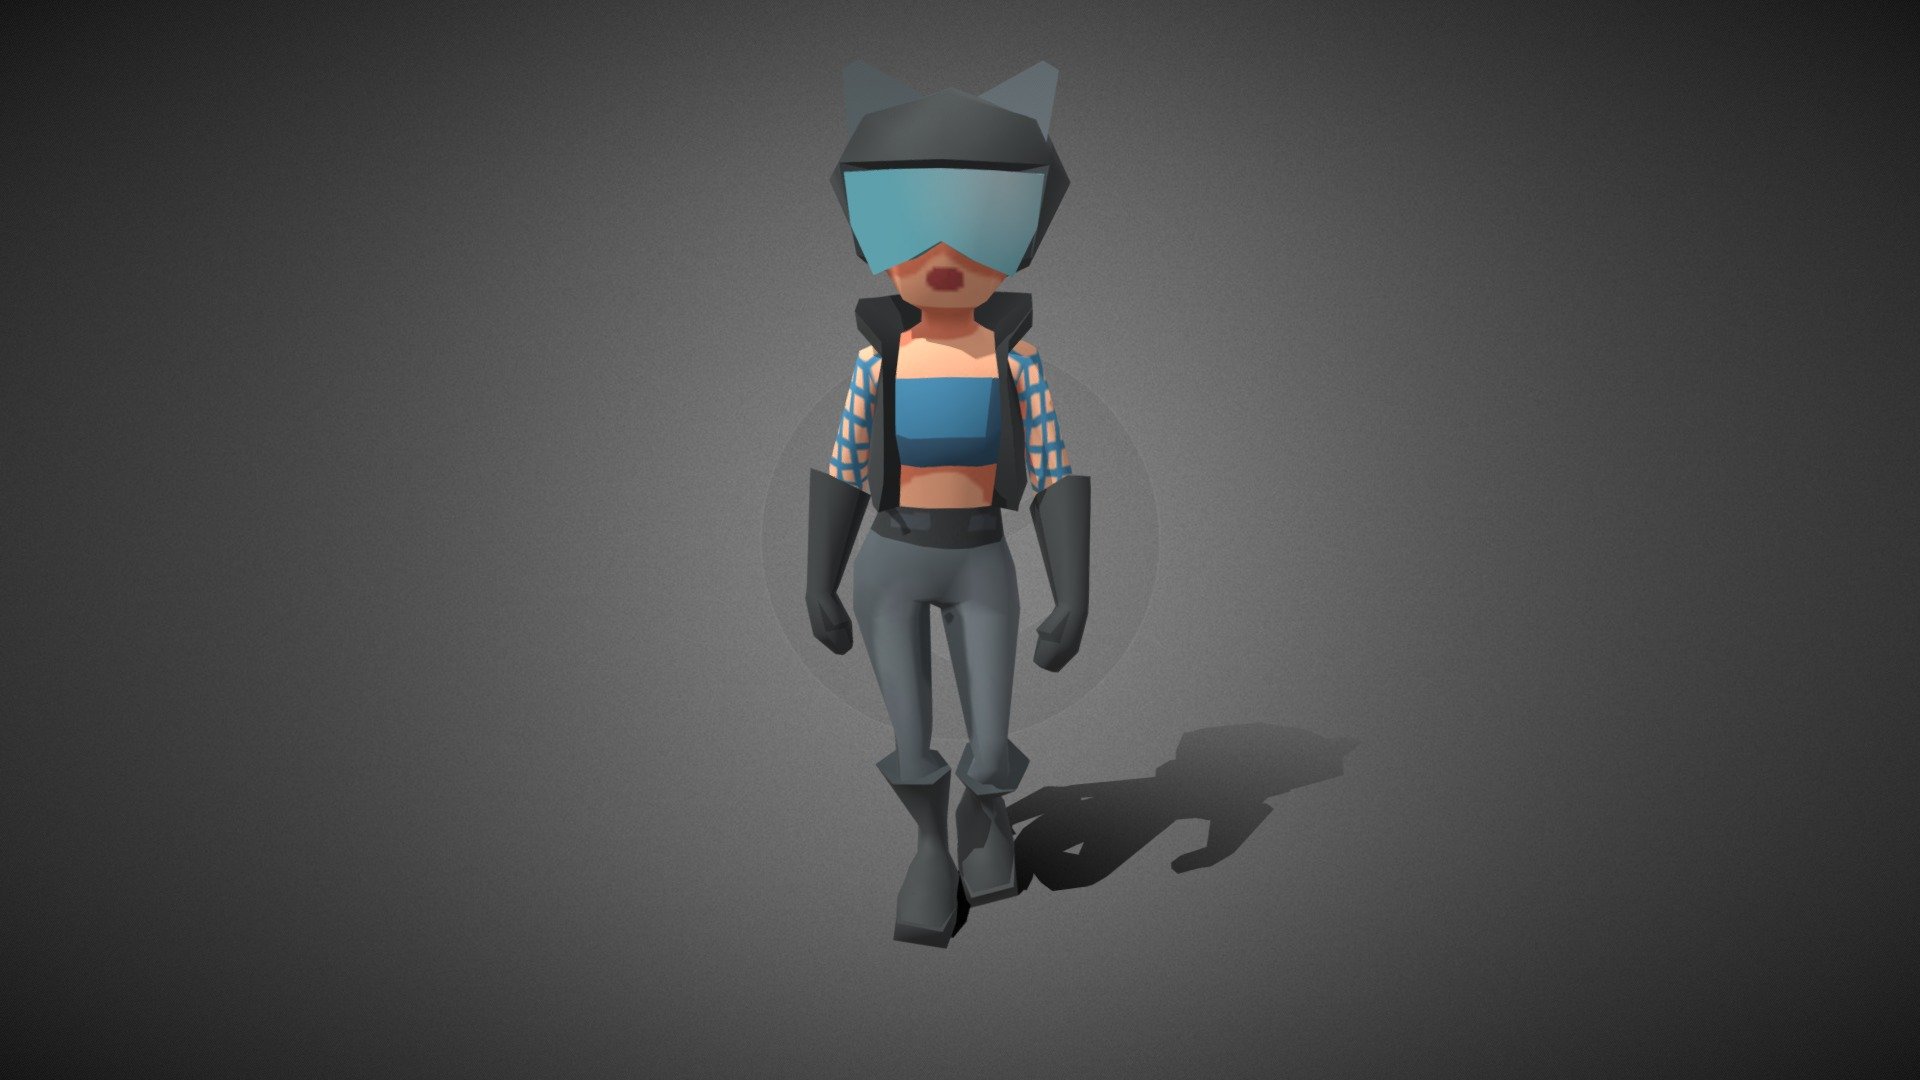 Cool biker girl.
I'm not sure if it will be comfortable for her to quickly ride her bike with those ears on the helmet) - Lowpoly biker girl - 3D model by Sololopenko 3d model